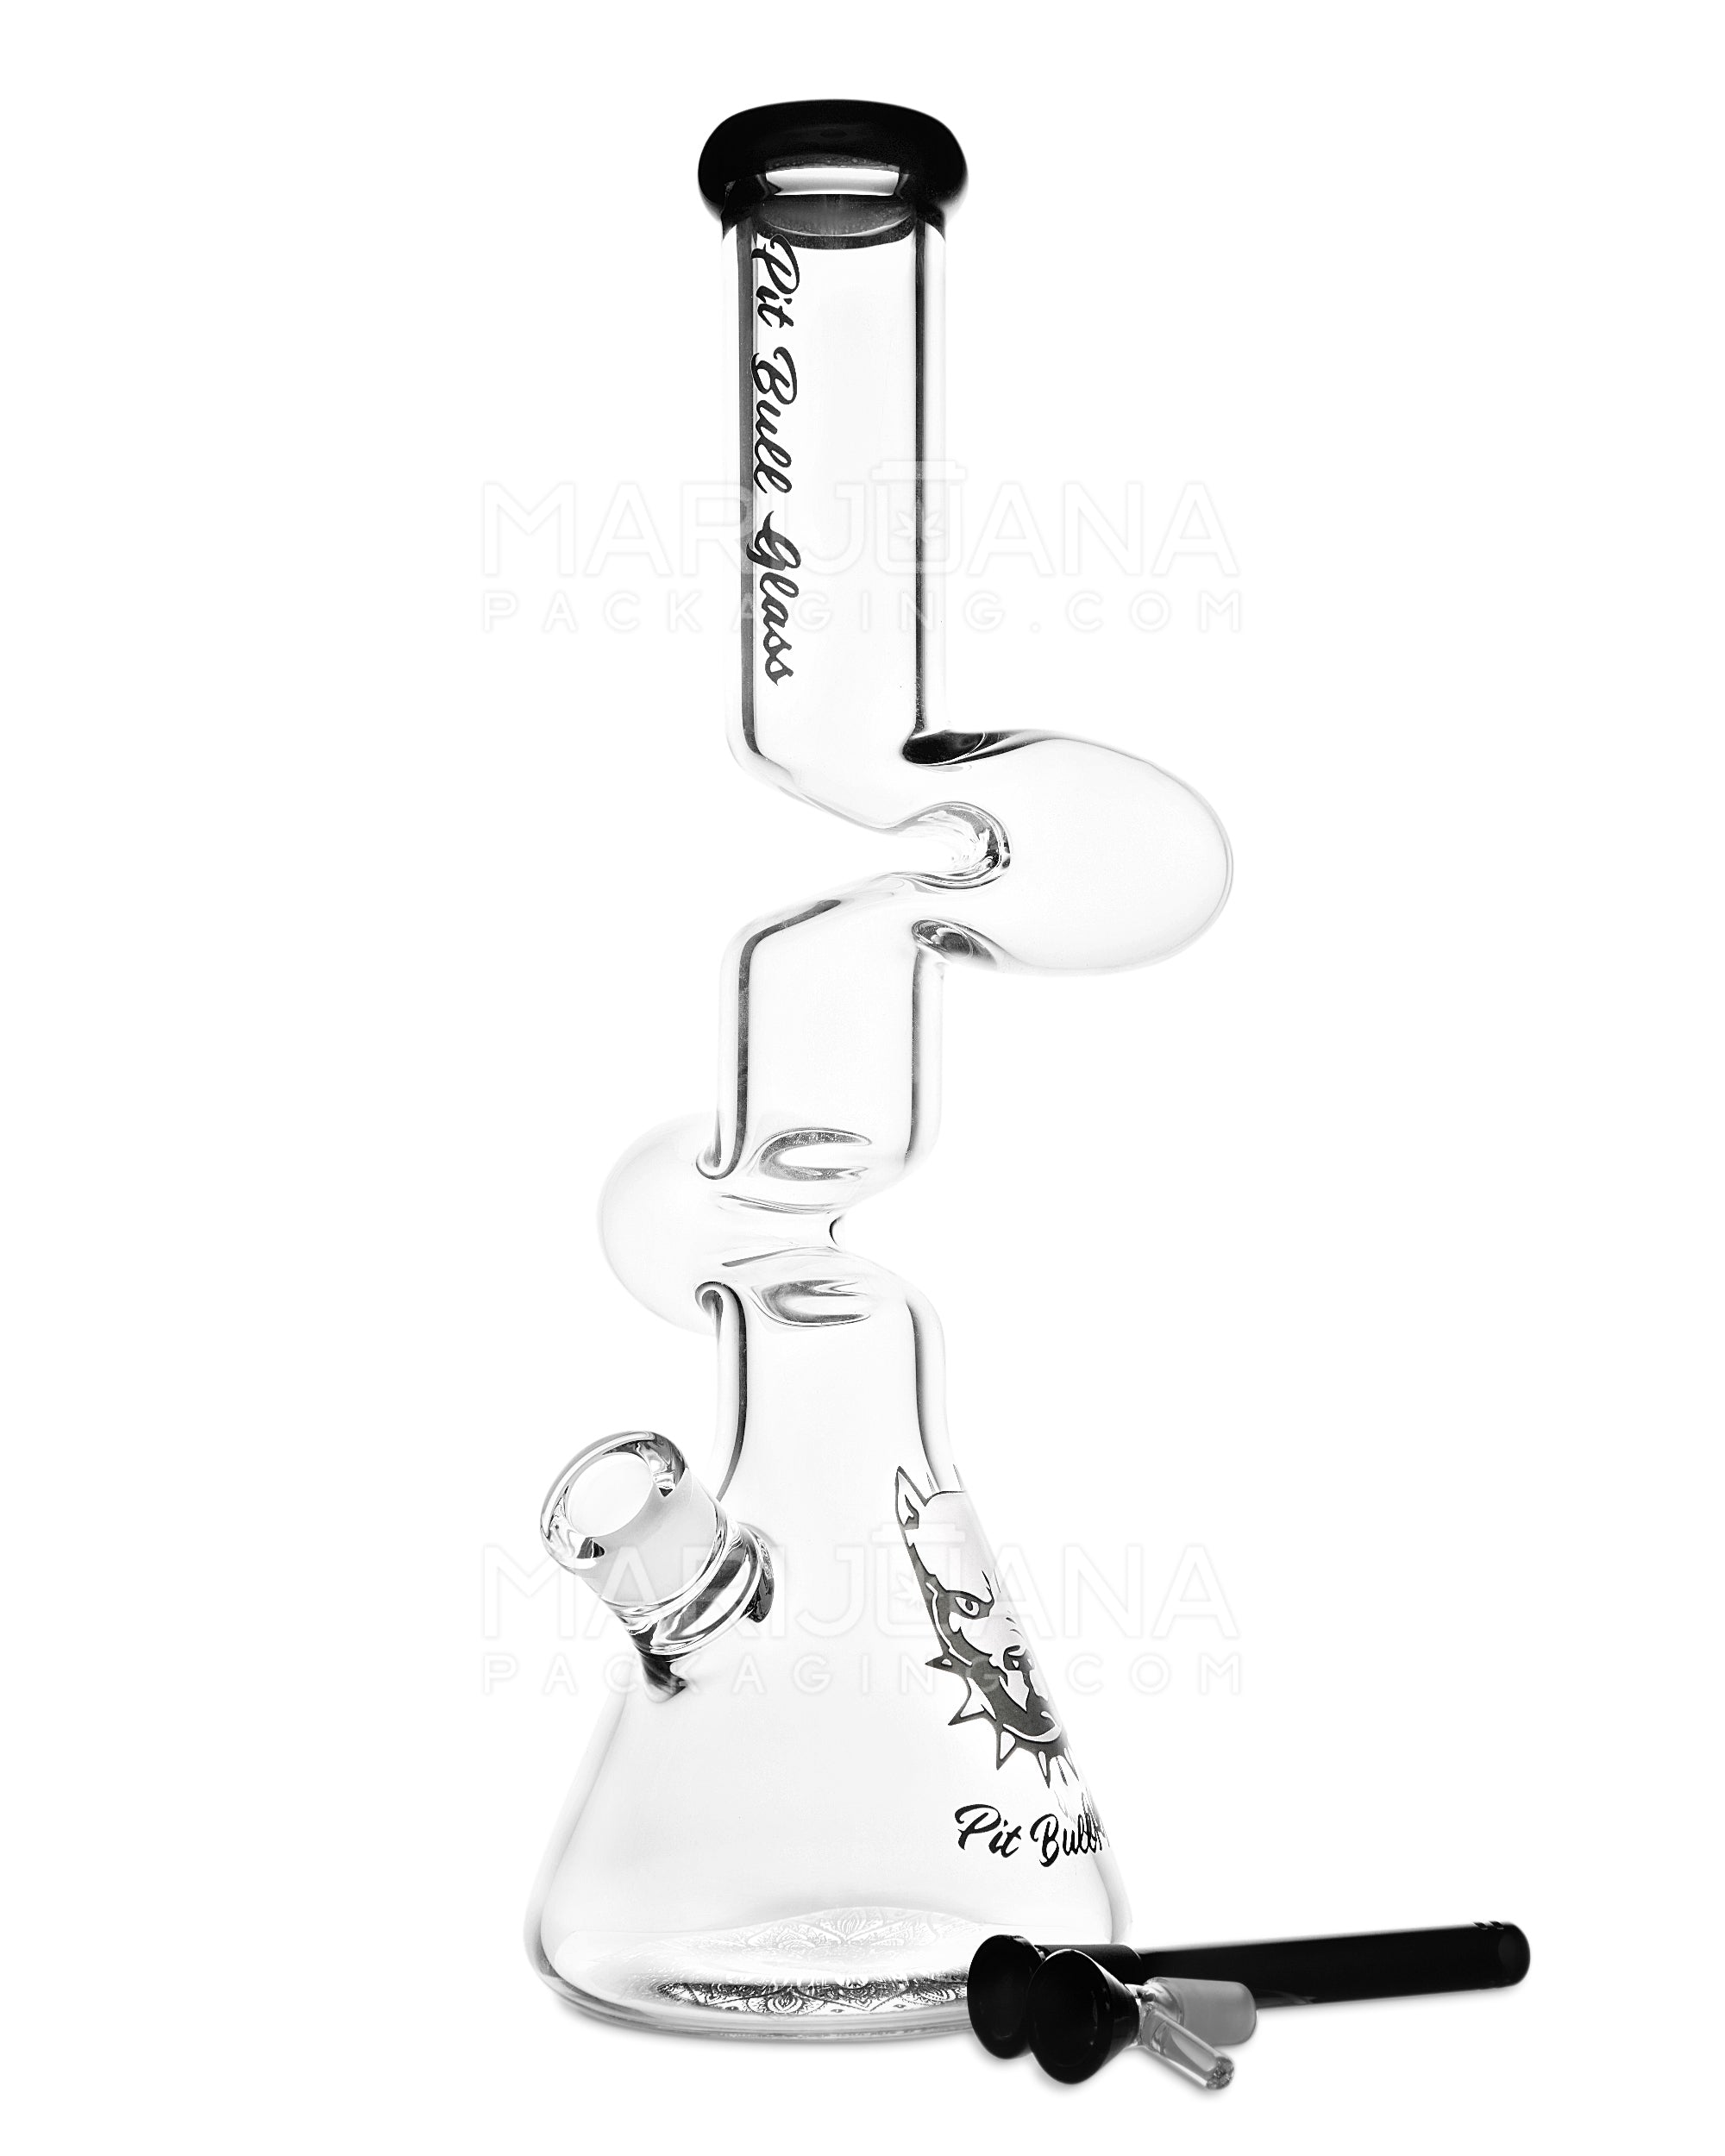 PIT BULL | Z-Neck Glass Beaker Water Pipe w/ Floral Base | 16.5in Tall - 14mm Bowl - Black - 2